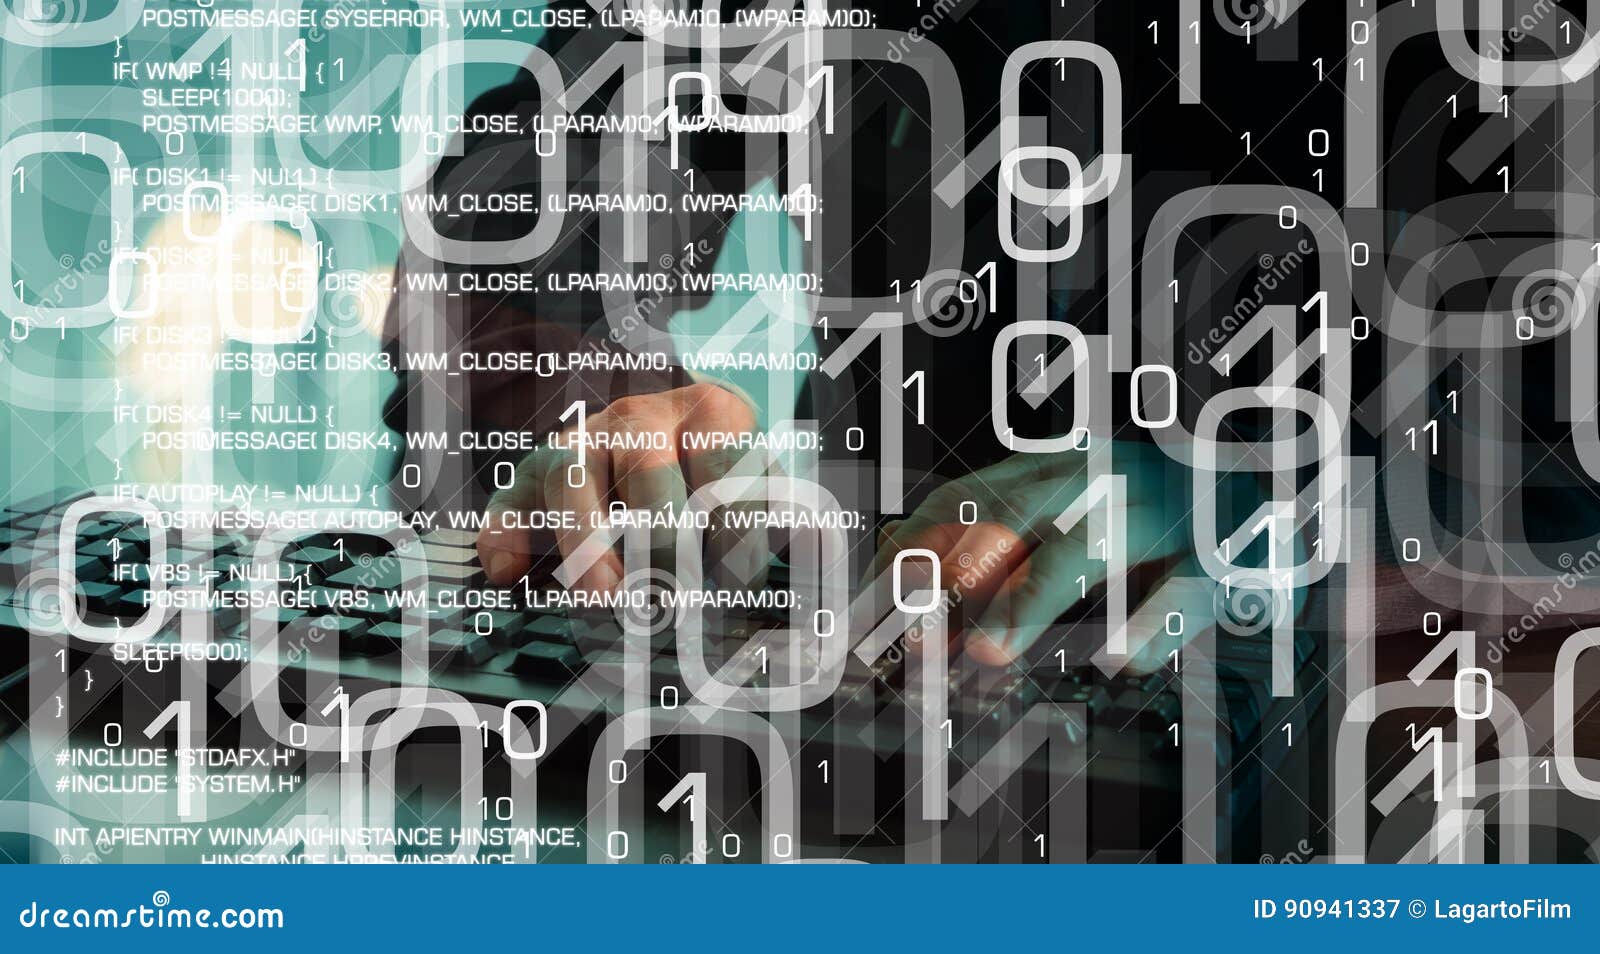 Cyber World Security, Hacked Computer in Cyber Attack Stock Image photo